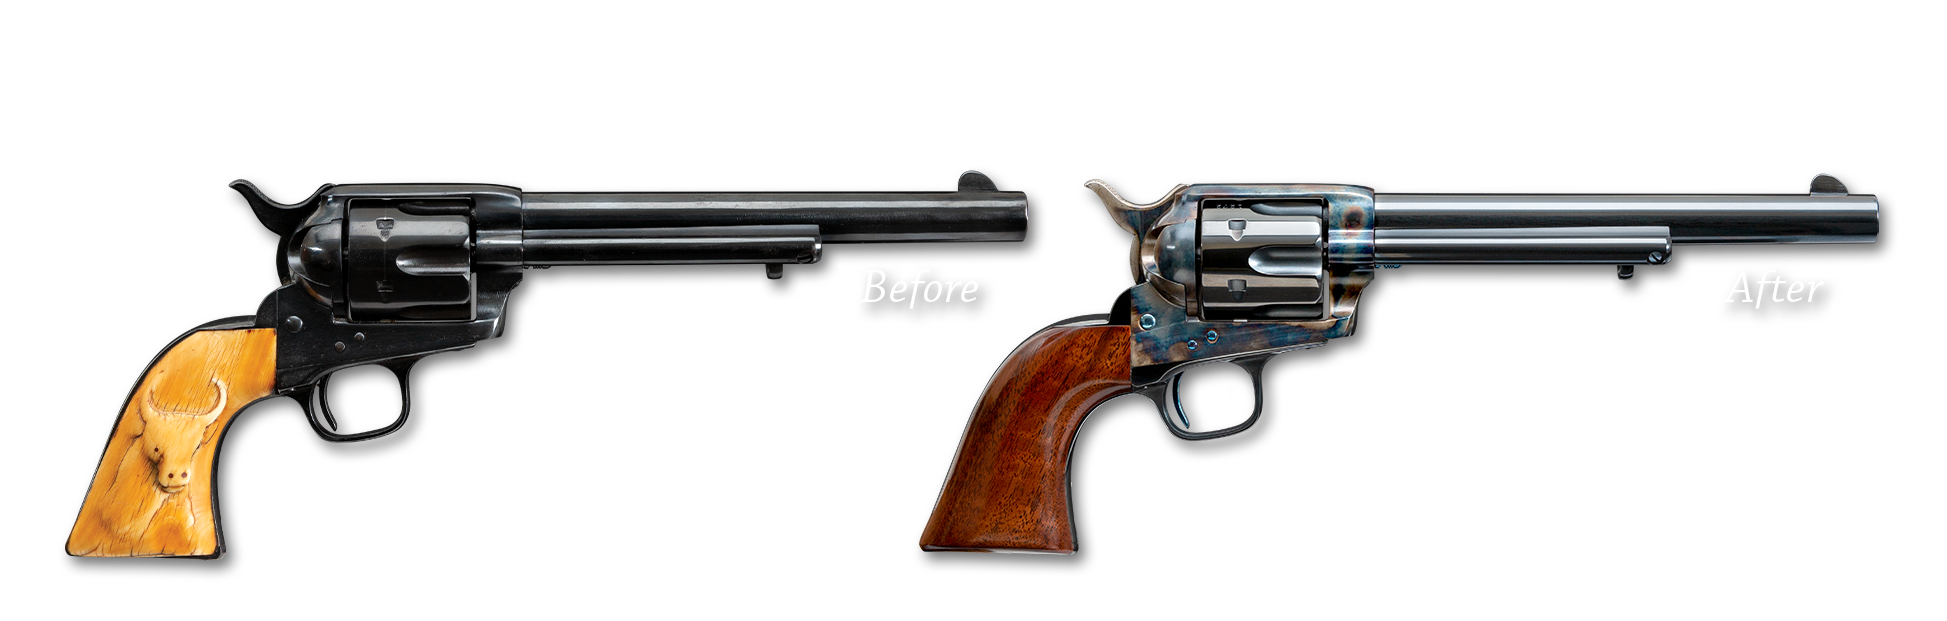 Photo of a Colt Super Match .38 Super Automatic pistol, both before and after restoration by Turnbull Restoration of Bloomfield, NY